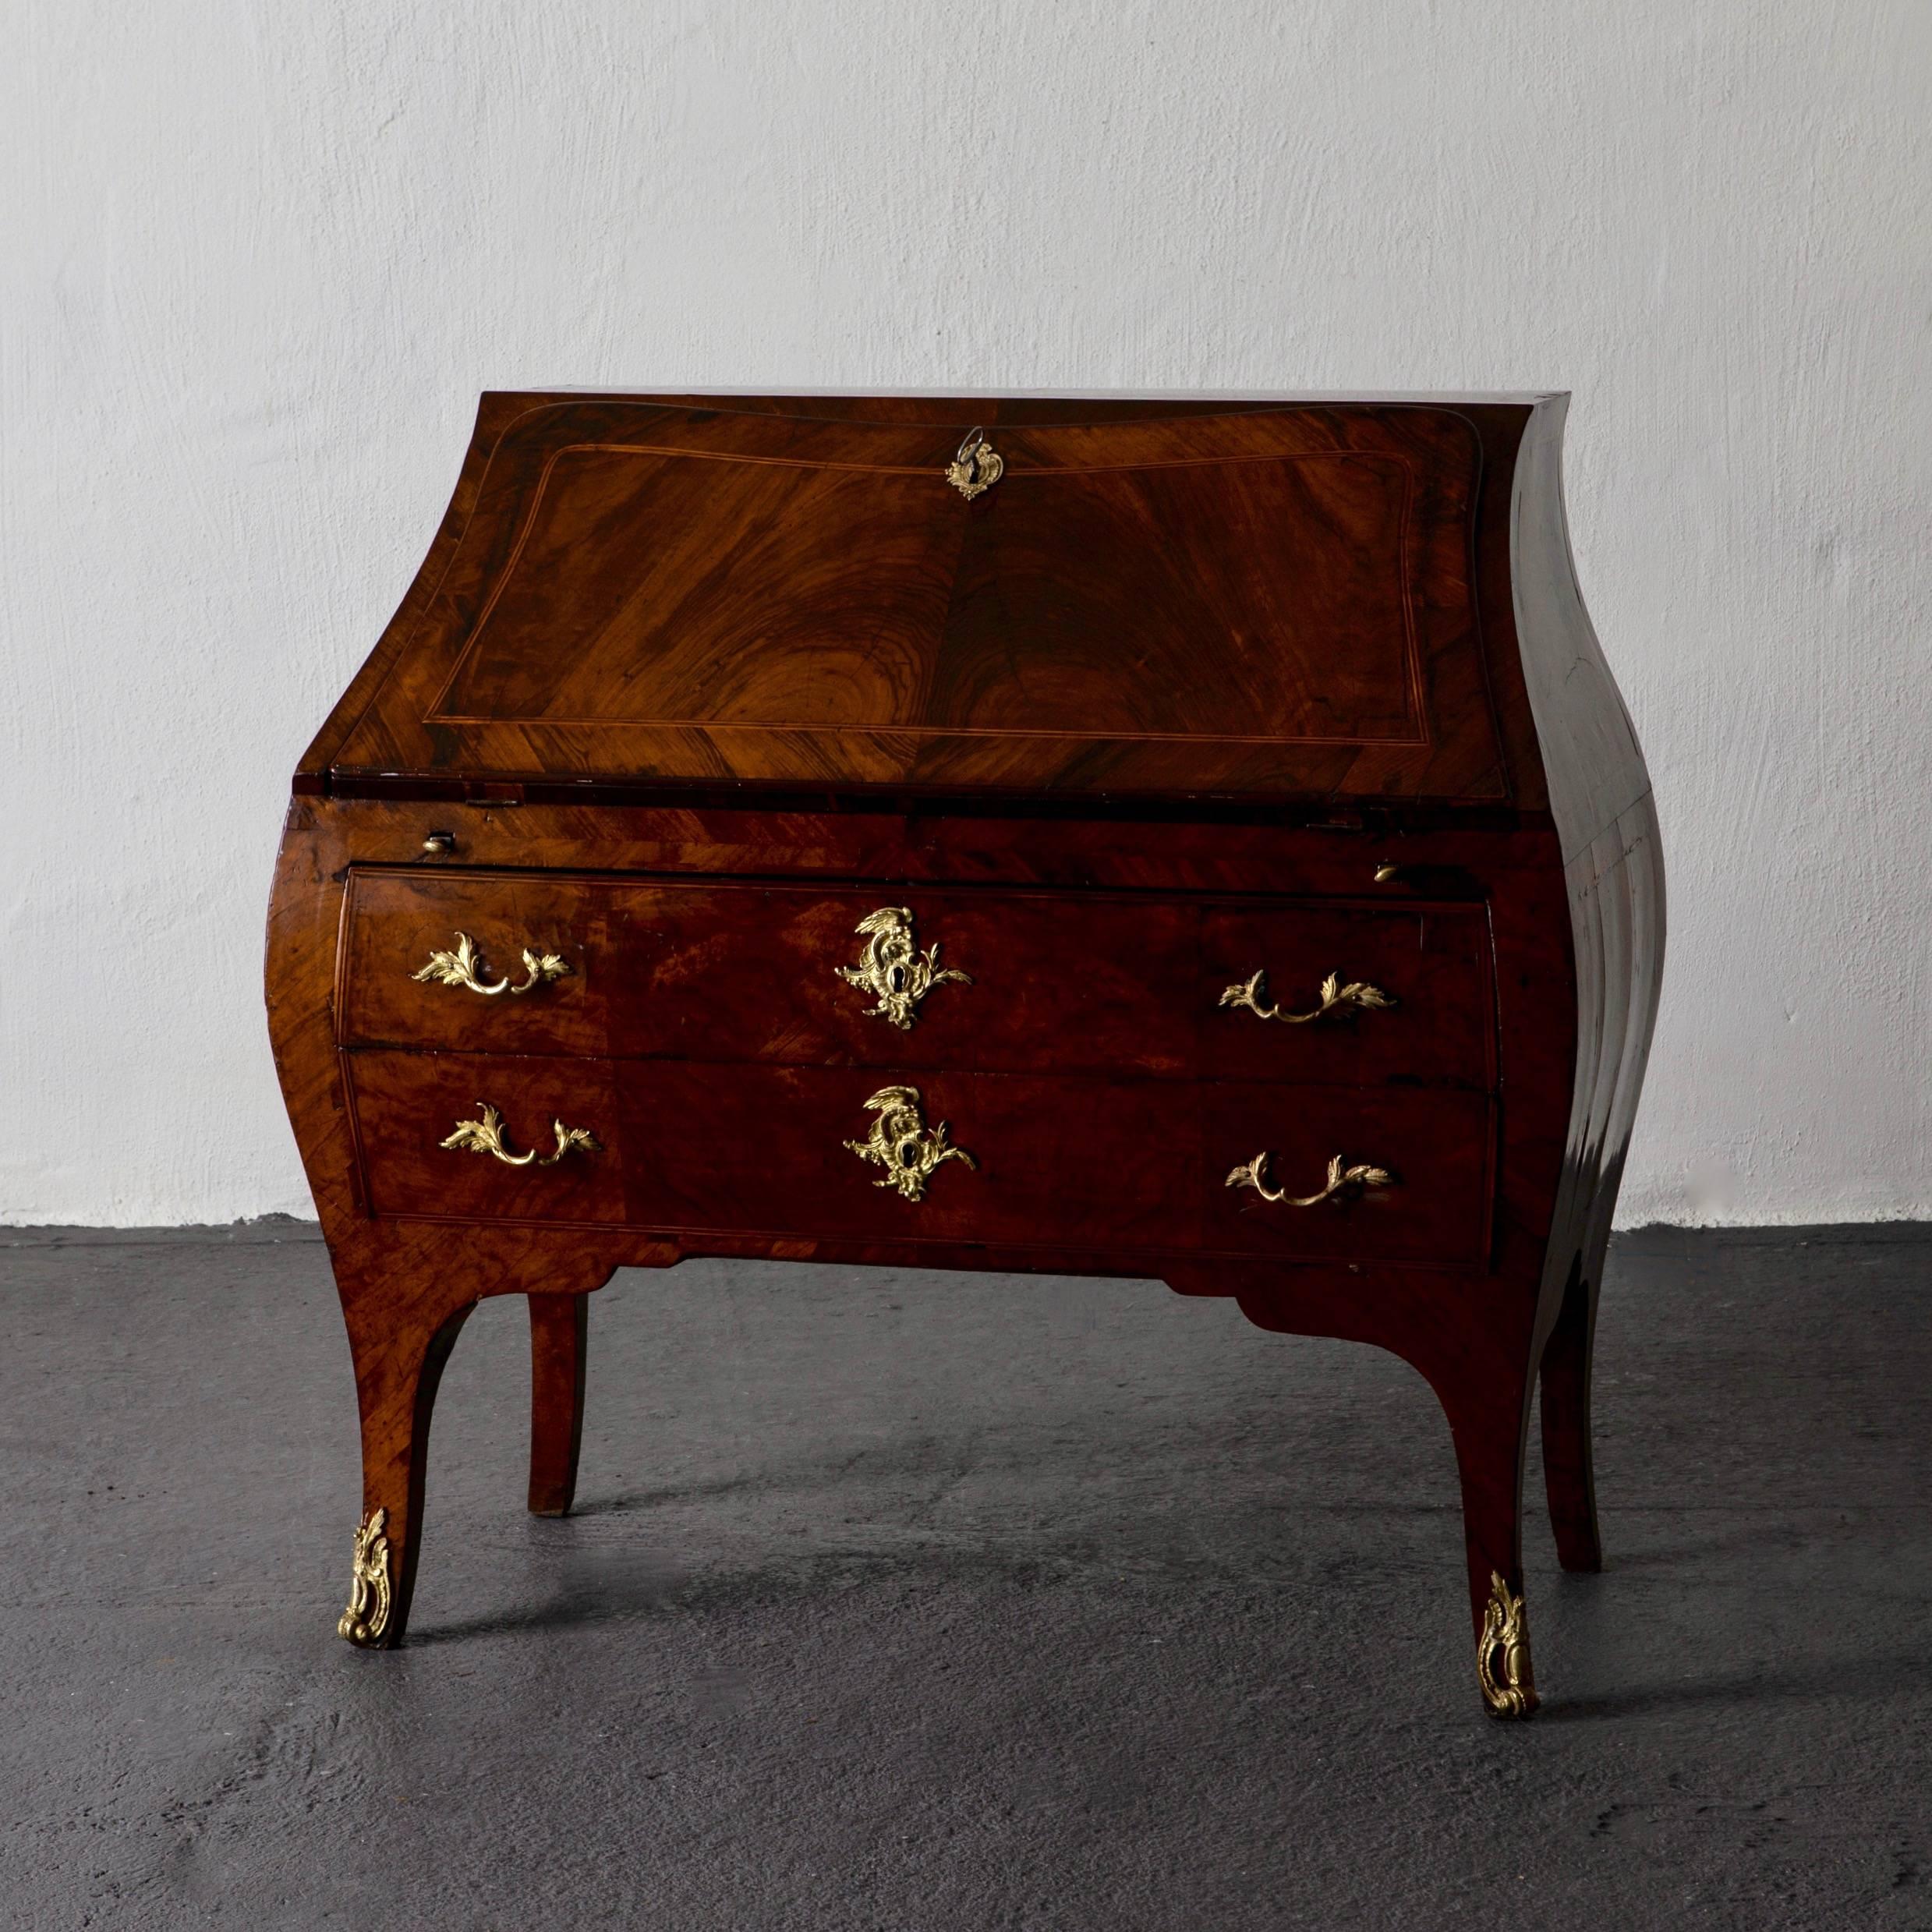 Secretary Writing Chest Swedish Rococo 18th Century Sweden. An exquisite secretary in a very high quality. Made in Sweden during the Rococo period 1750-1775 in a walnut veneer. Custom gilt bronze hardware and details in the shape of acanthus leaves,